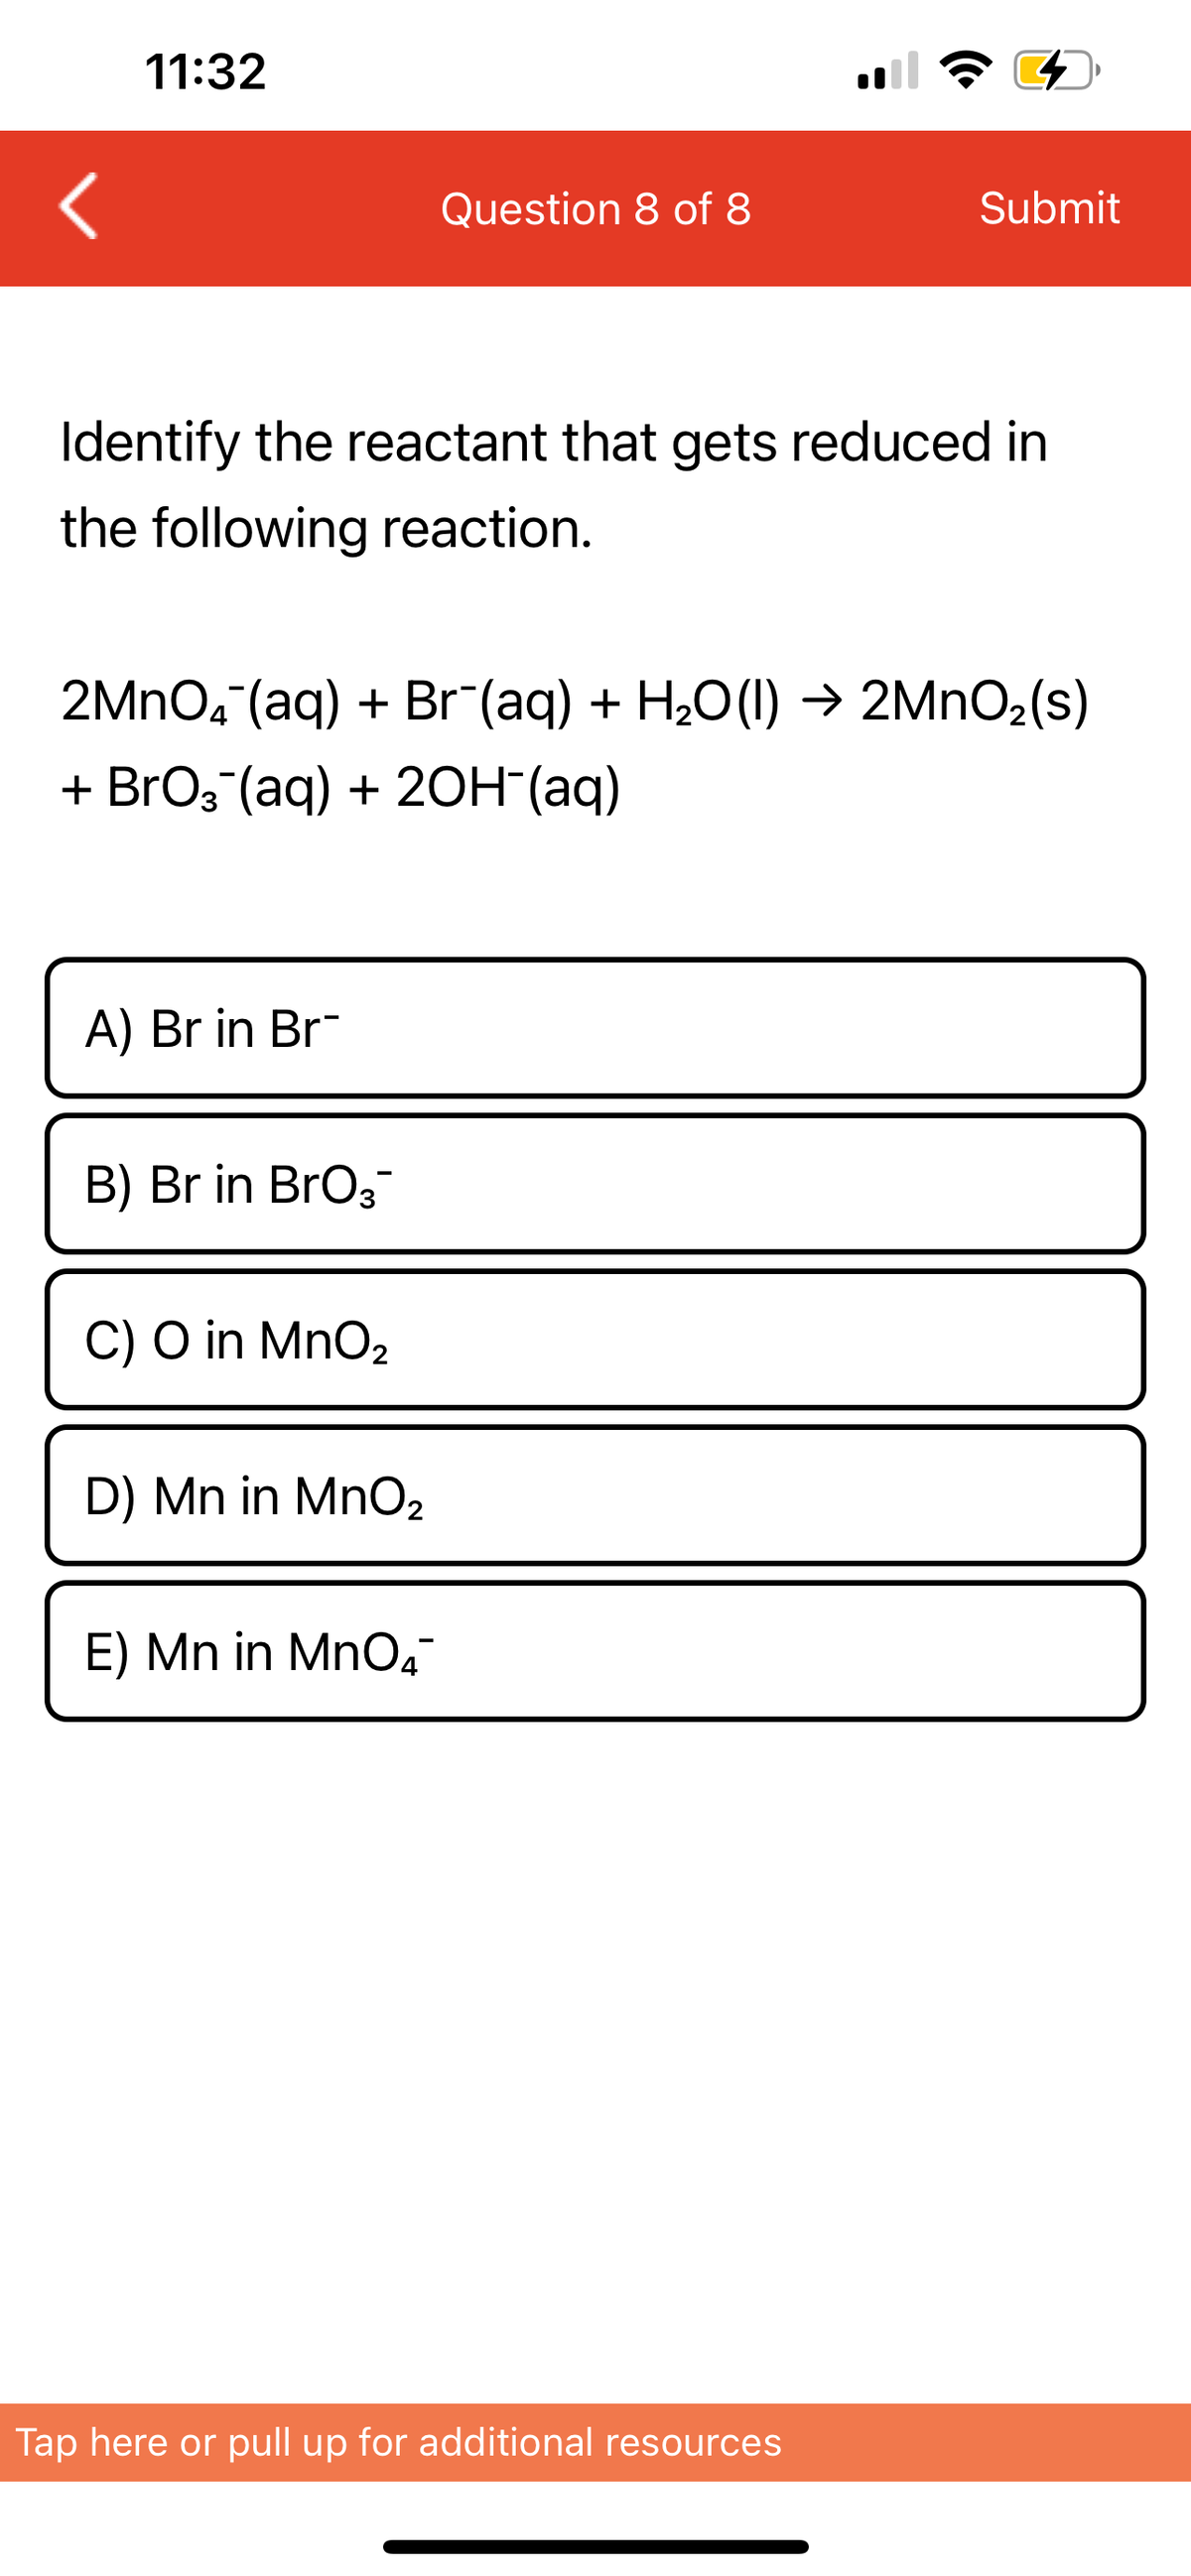 11:32
A) Br in Br
Identify the reactant that gets reduced in
the following reaction.
B) Br in BrO3™
2MnO4 (aq) + Br¯(aq) + H₂O(l) → 2MnO₂ (s)
+ BrO3(aq) + 2OH(aq)
C) O in MnO₂
Question 8 of 8
D) Mn in MnO₂
E) Mn in MnO4™
G
Submit
Tap here or pull up for additional resources